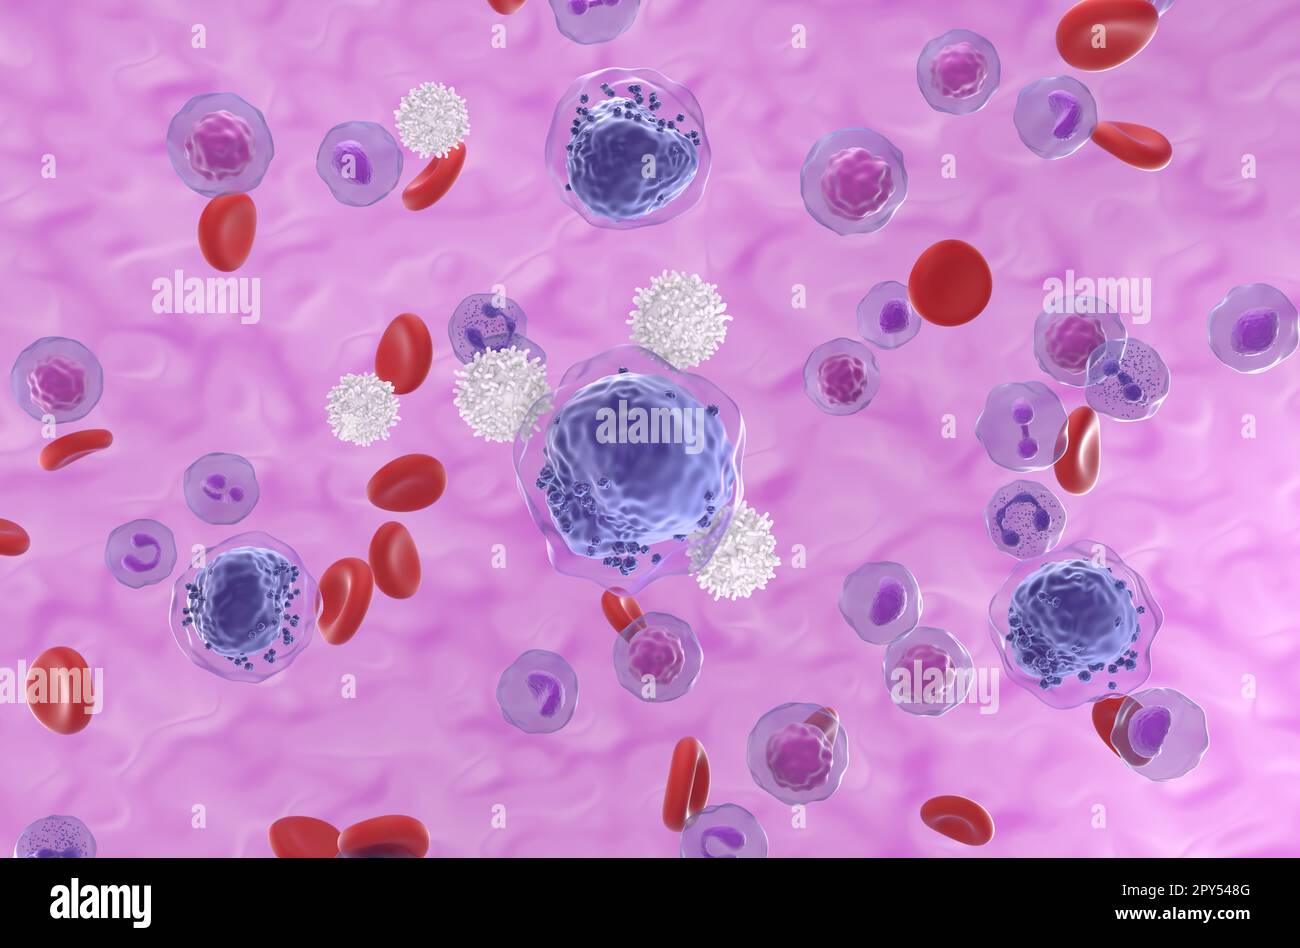 T-cells attack acute myeloid leukemia (AML) cells in blood flow - isometric view 3d illustration Stock Photo